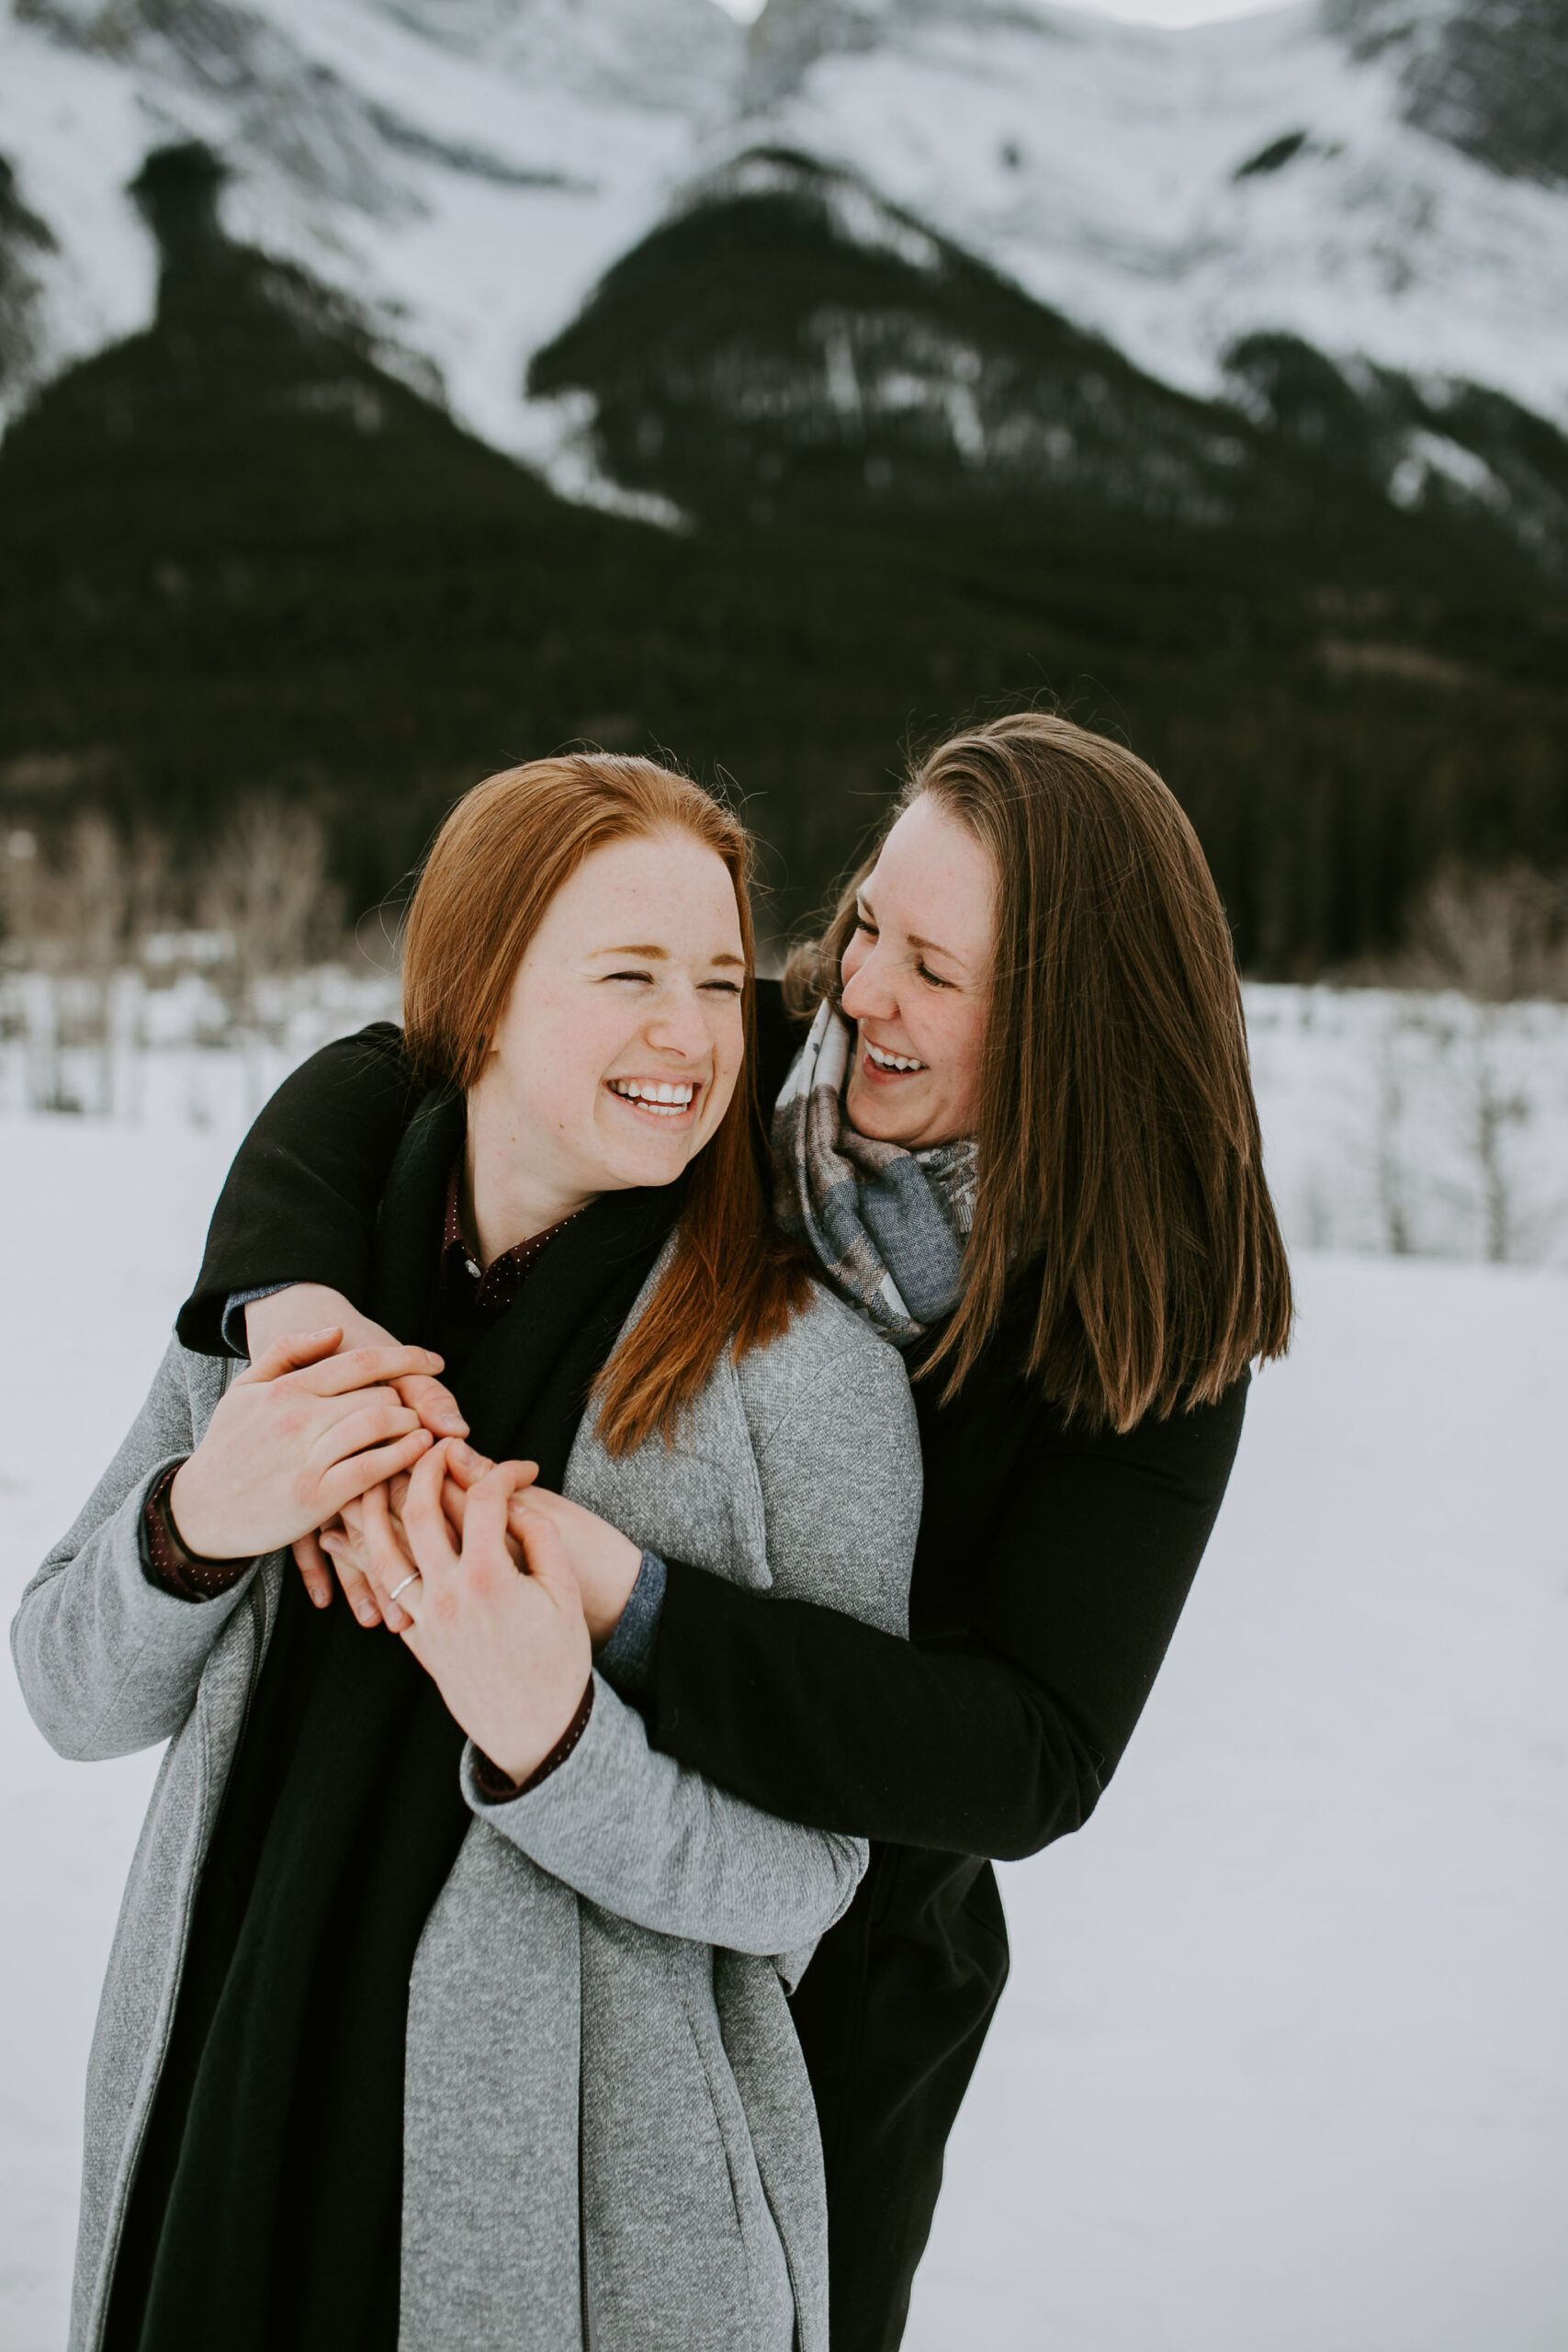 young hip and married calgary wedding officiants, lgbtq friendly wedding